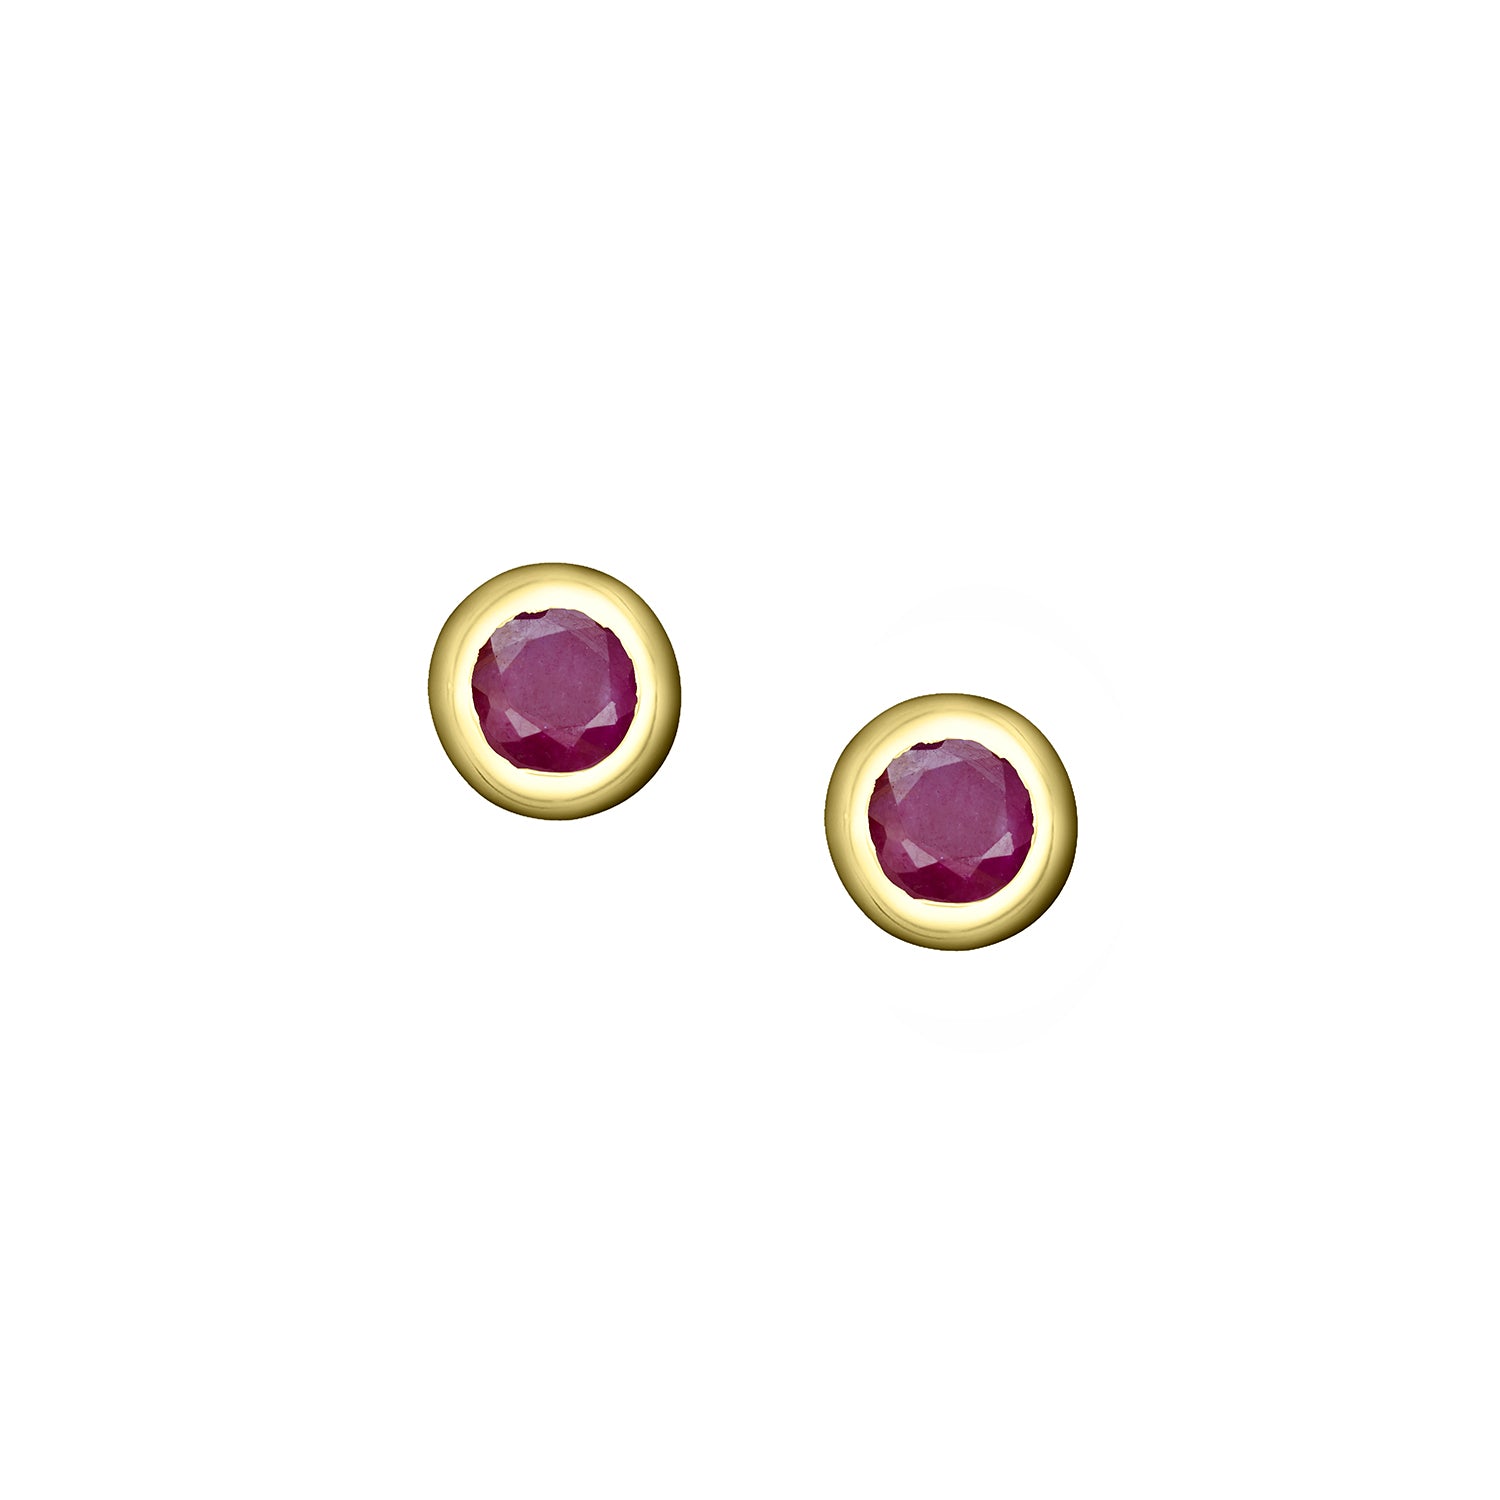 Polished Gold Vermeil Crescent Moon Birthstone Earrings - July / Indian Ruby